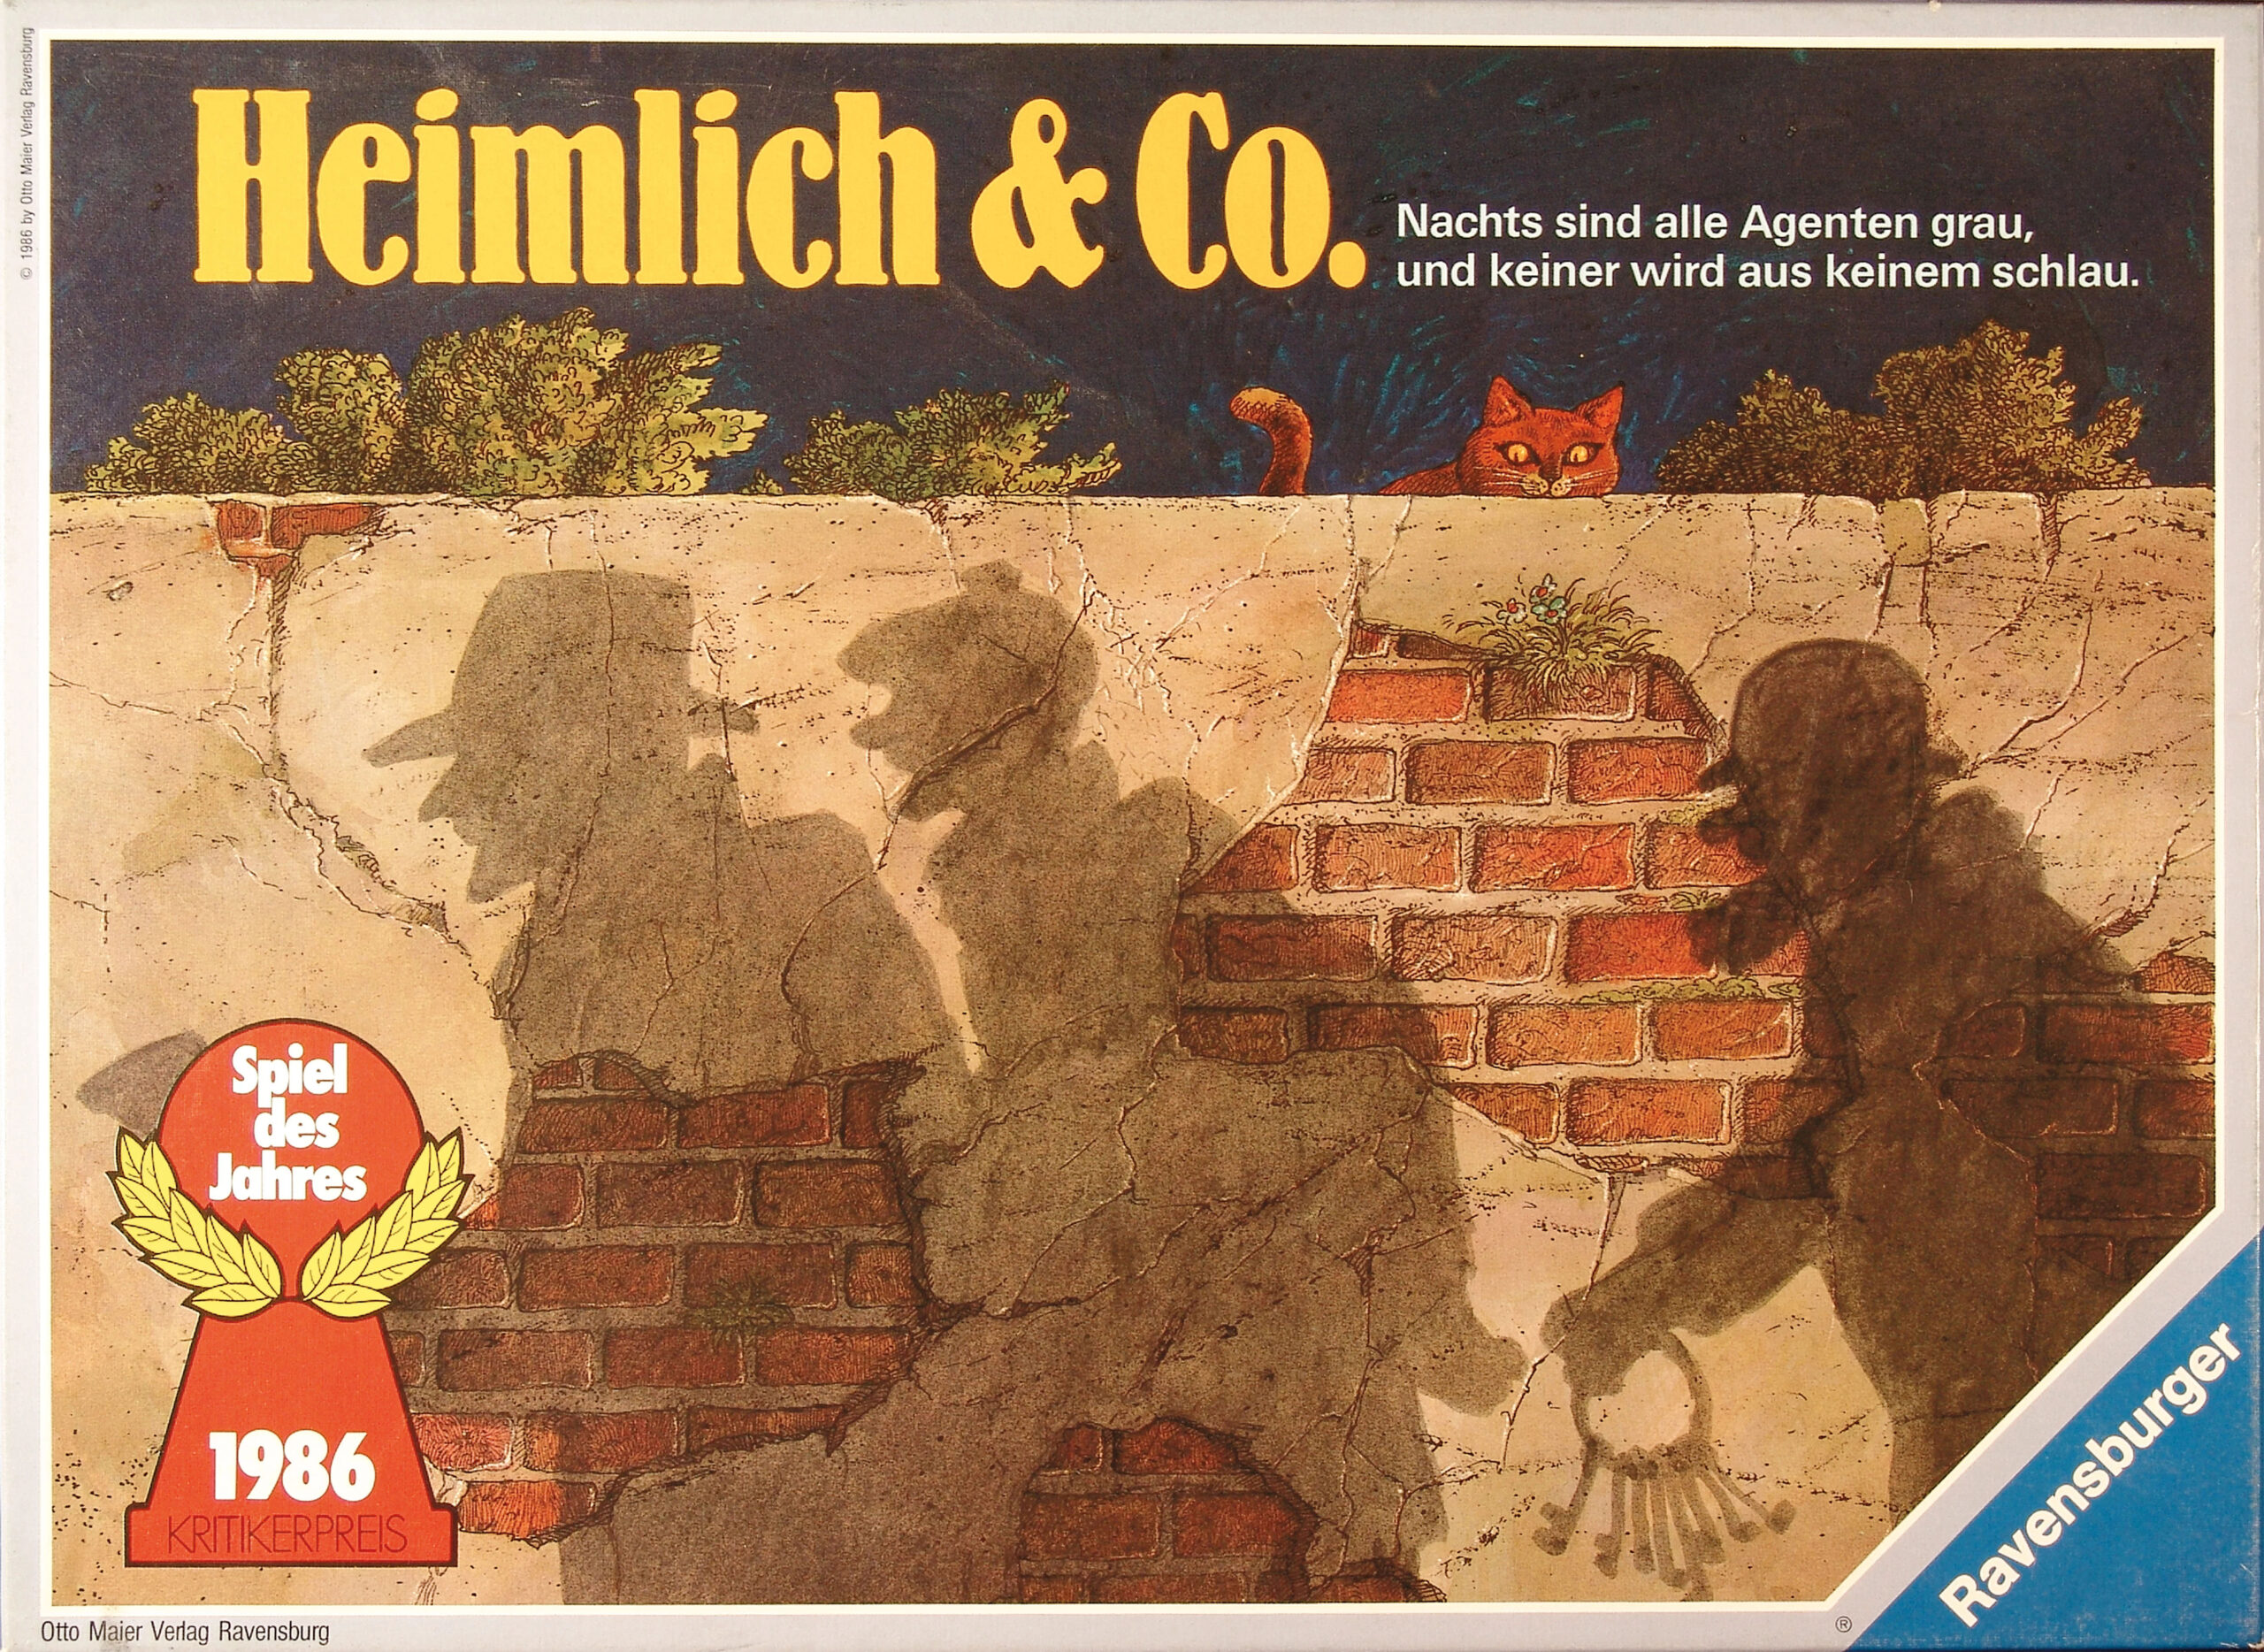 Heimlich and Co. – Detective & Co.